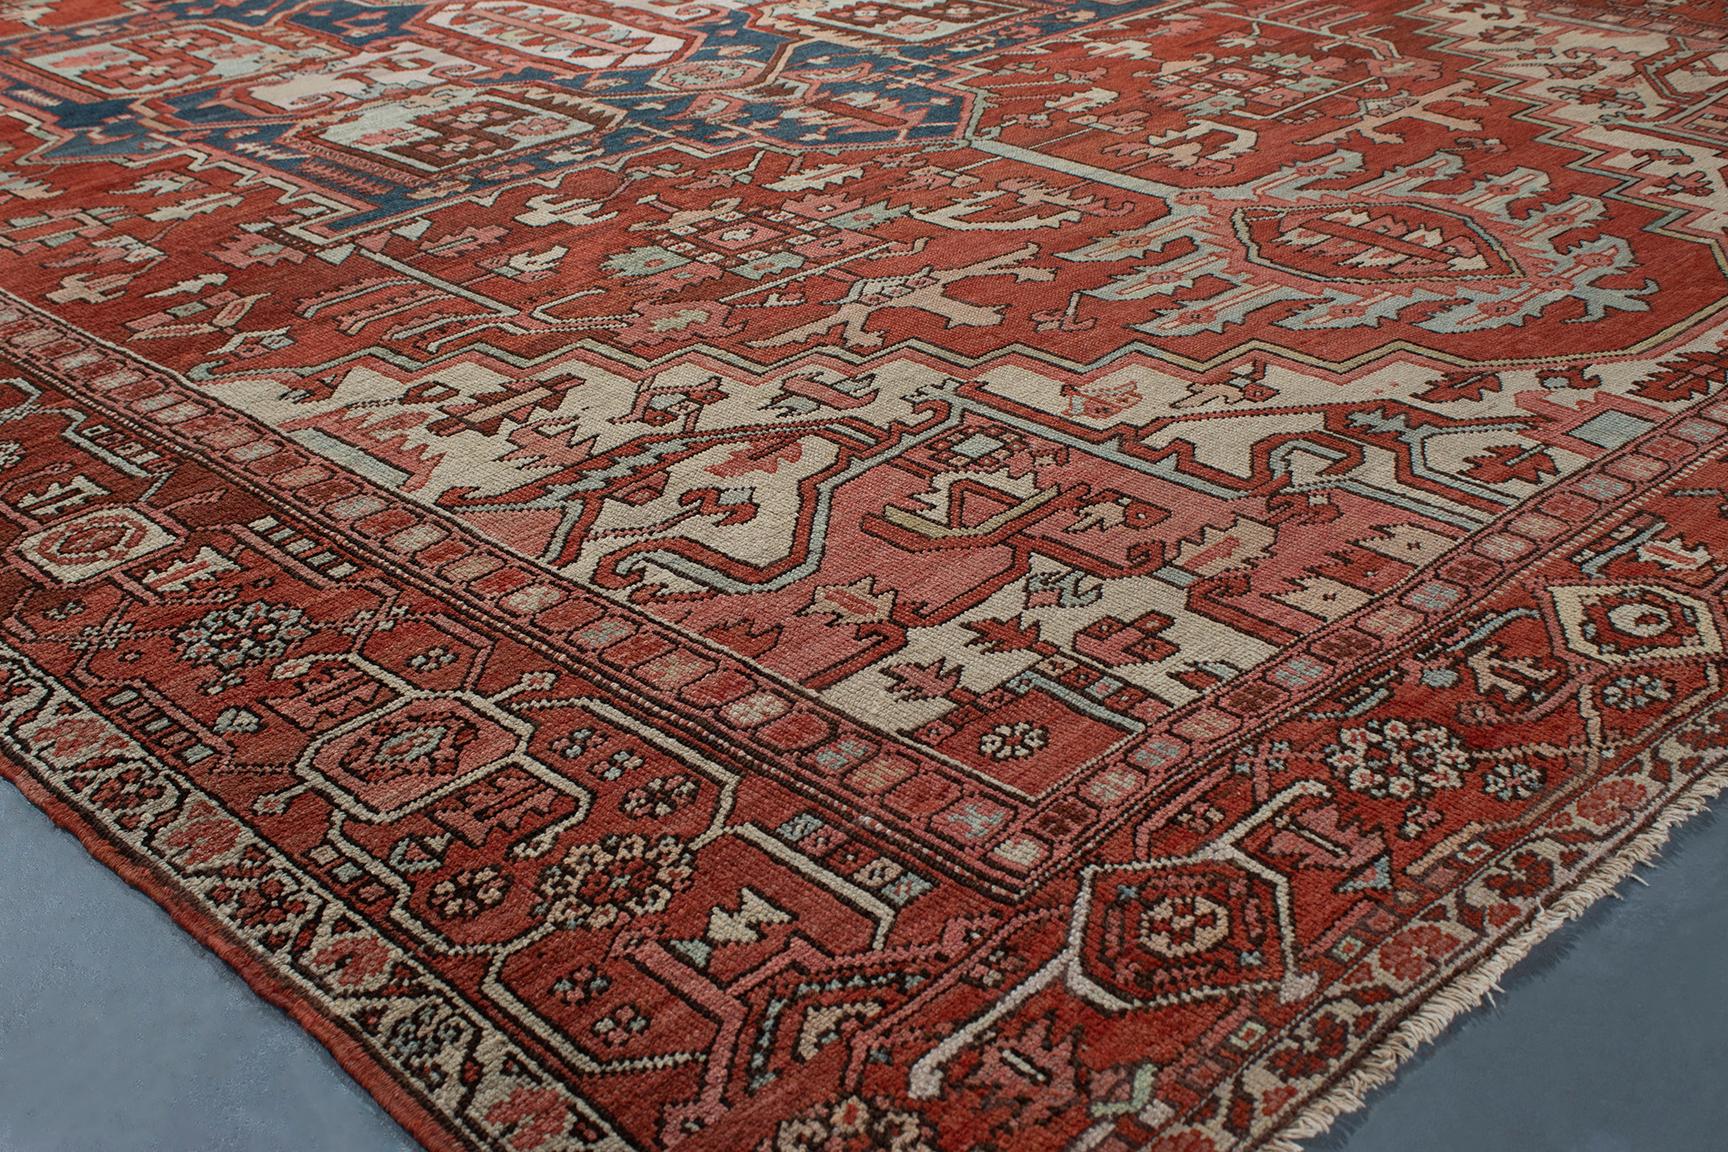 Antique Serapi rugs originated in Northwest Iran and are characterized by their finer weave with large-scale, spaciously placed designs. The majority of antique Serapis have medallions, but they can also be found with large-scale all-over patterns.